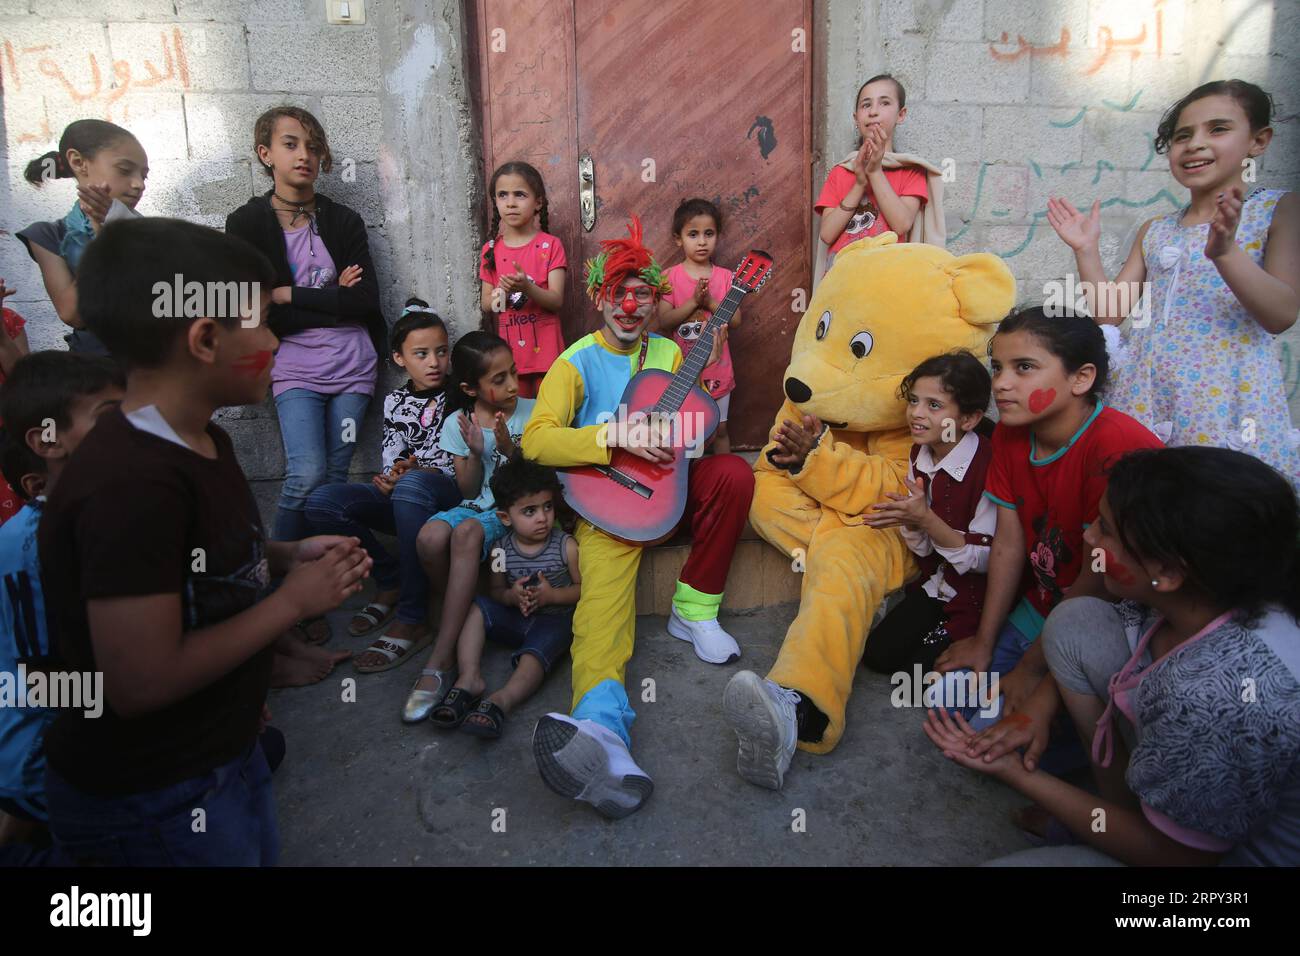 200612 -- GAZA, June 12, 2020 Xinhua -- Palestinian volunteers dressed as a clown and a bear perform for refugee children in an effort to lift their spirits in the southern Gaza Strip city of Rafah, on June 12, 2020. Photo by Khaled Omar/Xinhua MIDEAST-GAZA-RAFAH-VOLUNTEERS-REFUGEE CHILDREN PUBLICATIONxNOTxINxCHN Stock Photo